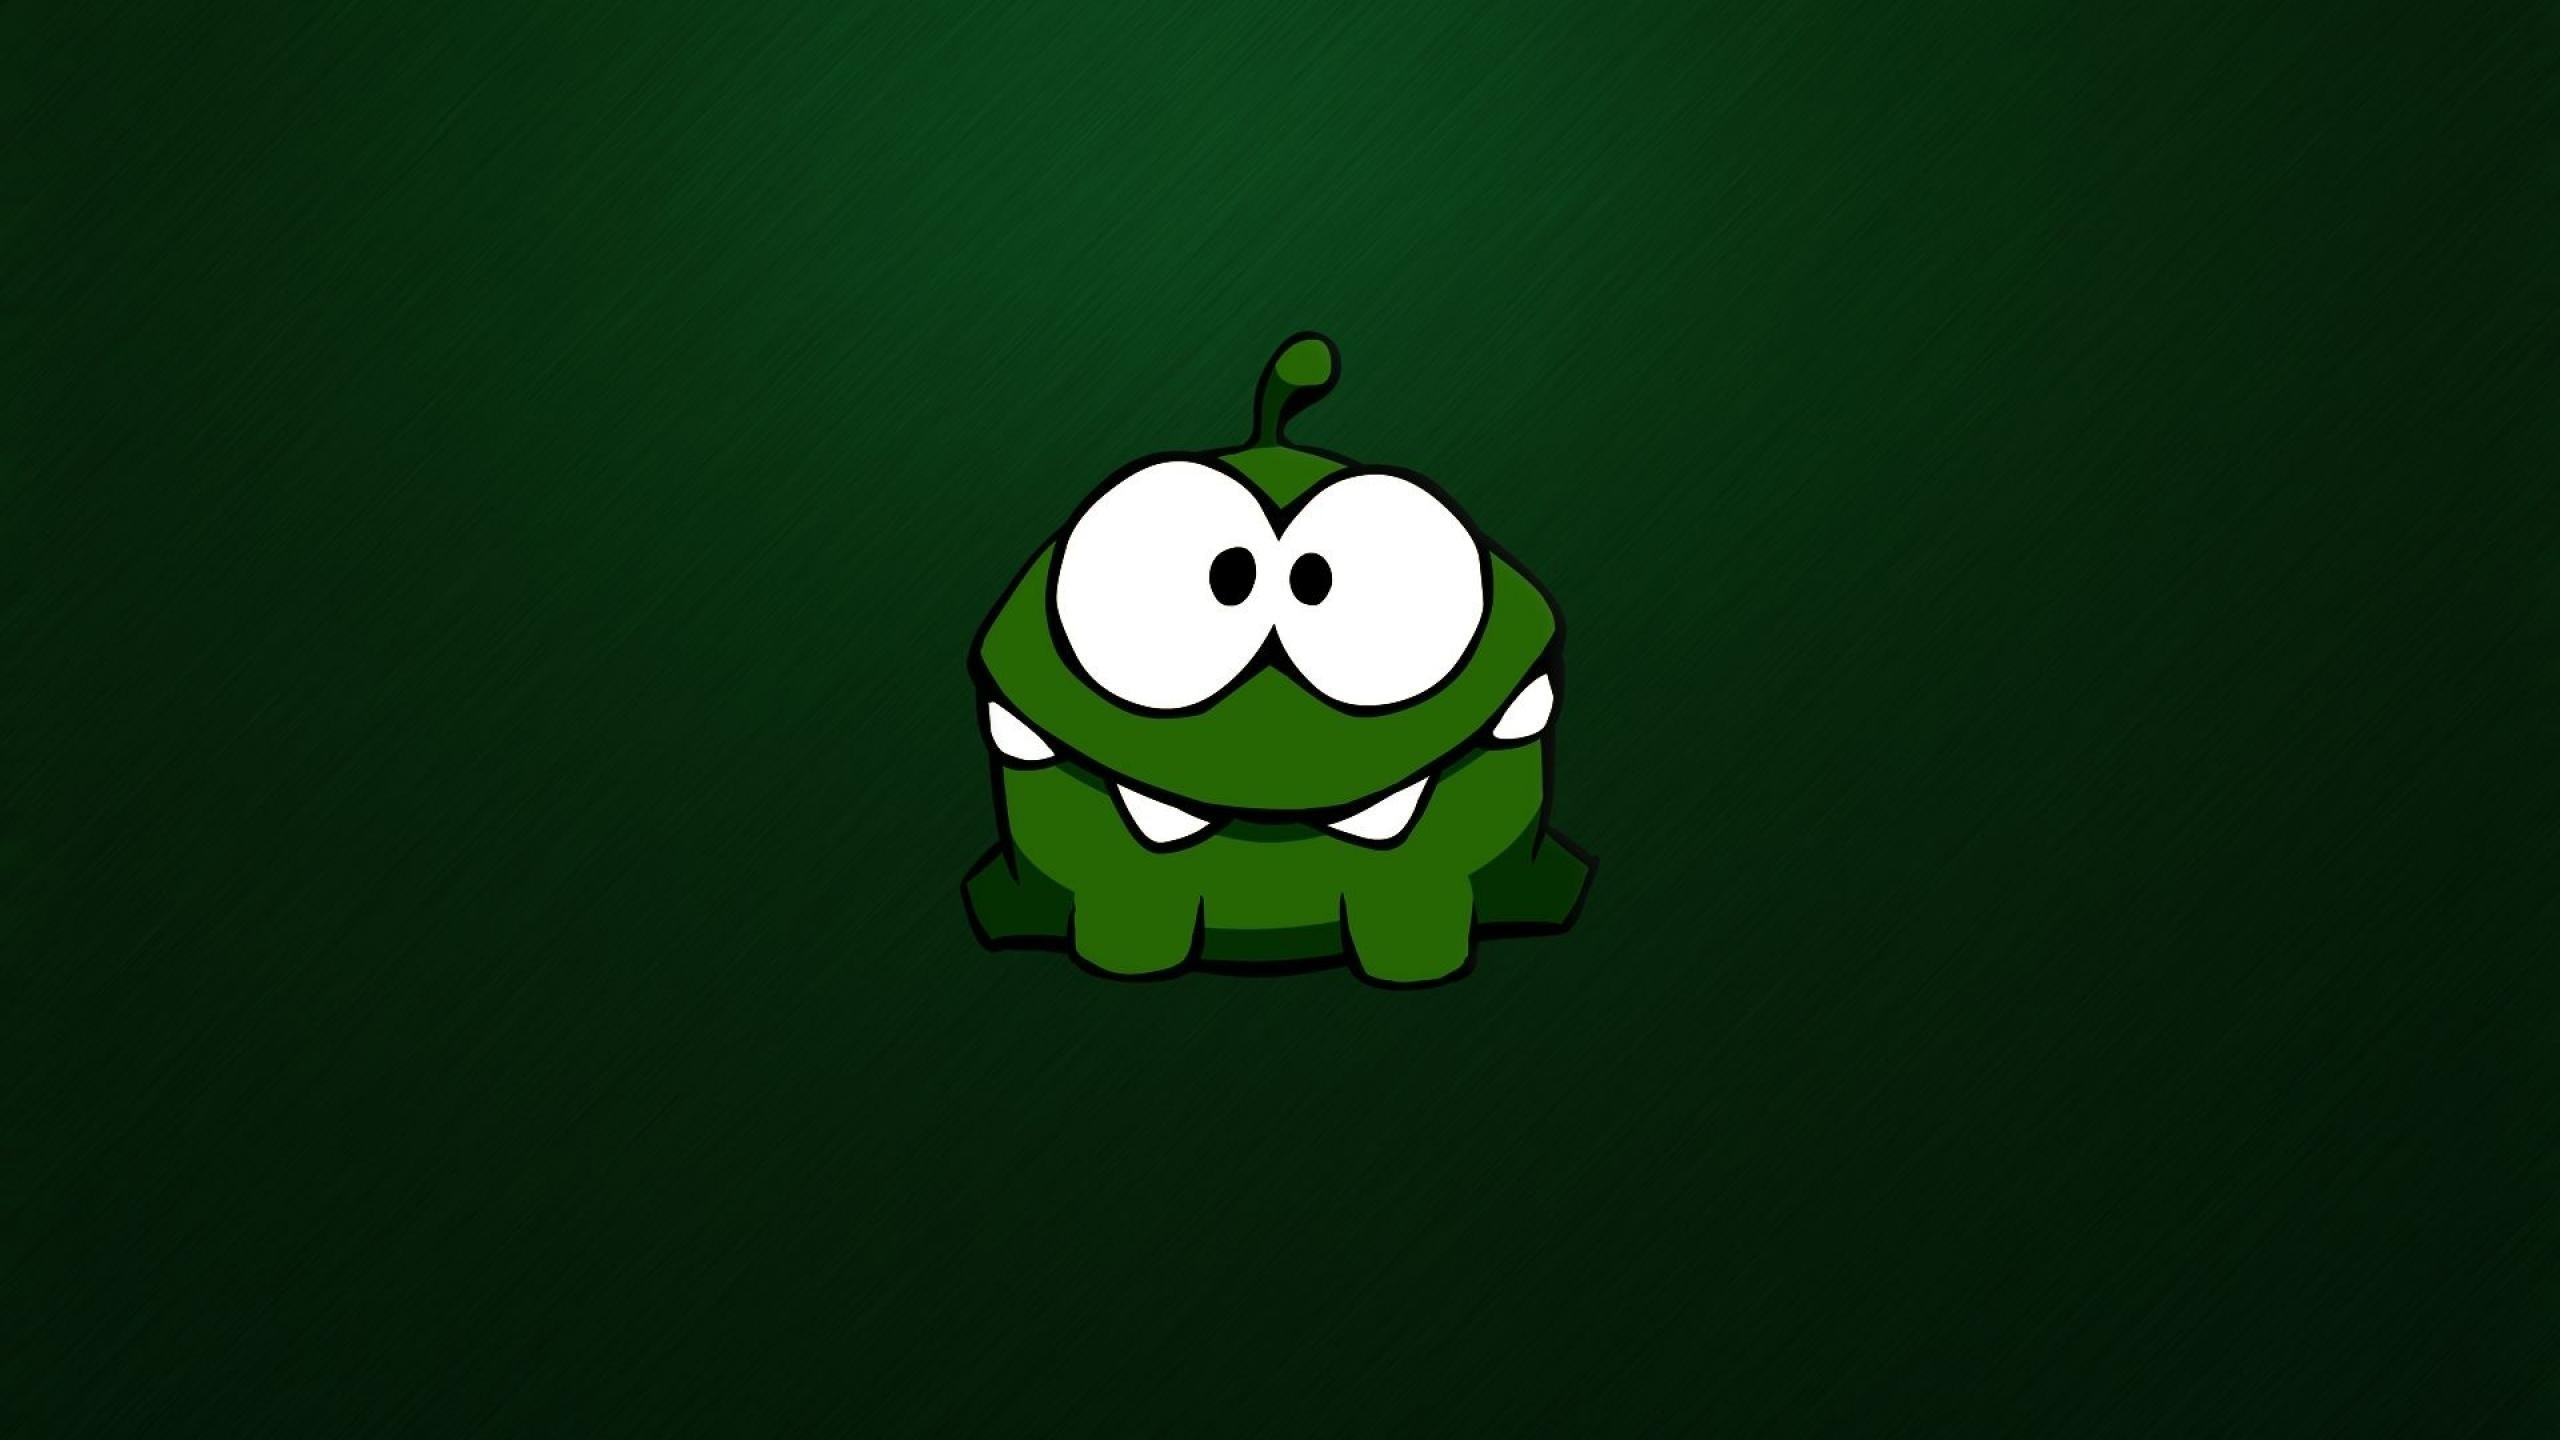 General 2560x1440 Cut The Rope green background humor simple background artwork